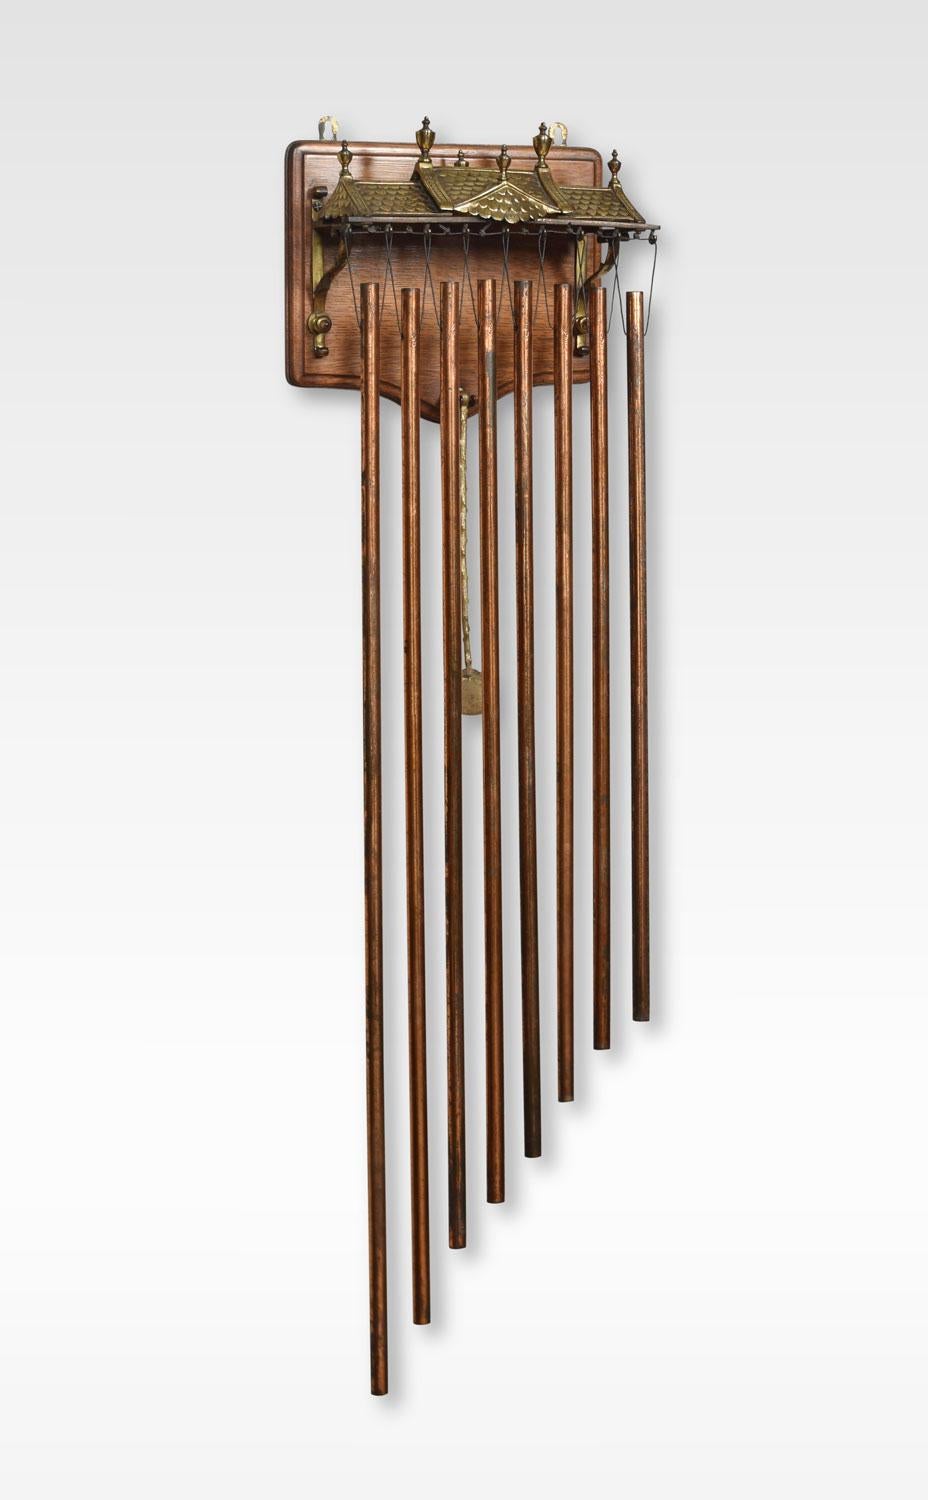 An unusual wall hanging tubular dinner gong. The oak back plaque applied with a brass pagoda roof above eight hanging copper tubular chimes, together with original Hammer.
Dimensions:
Height 40.5 inches
Length 12 inches
Width 6 inches.